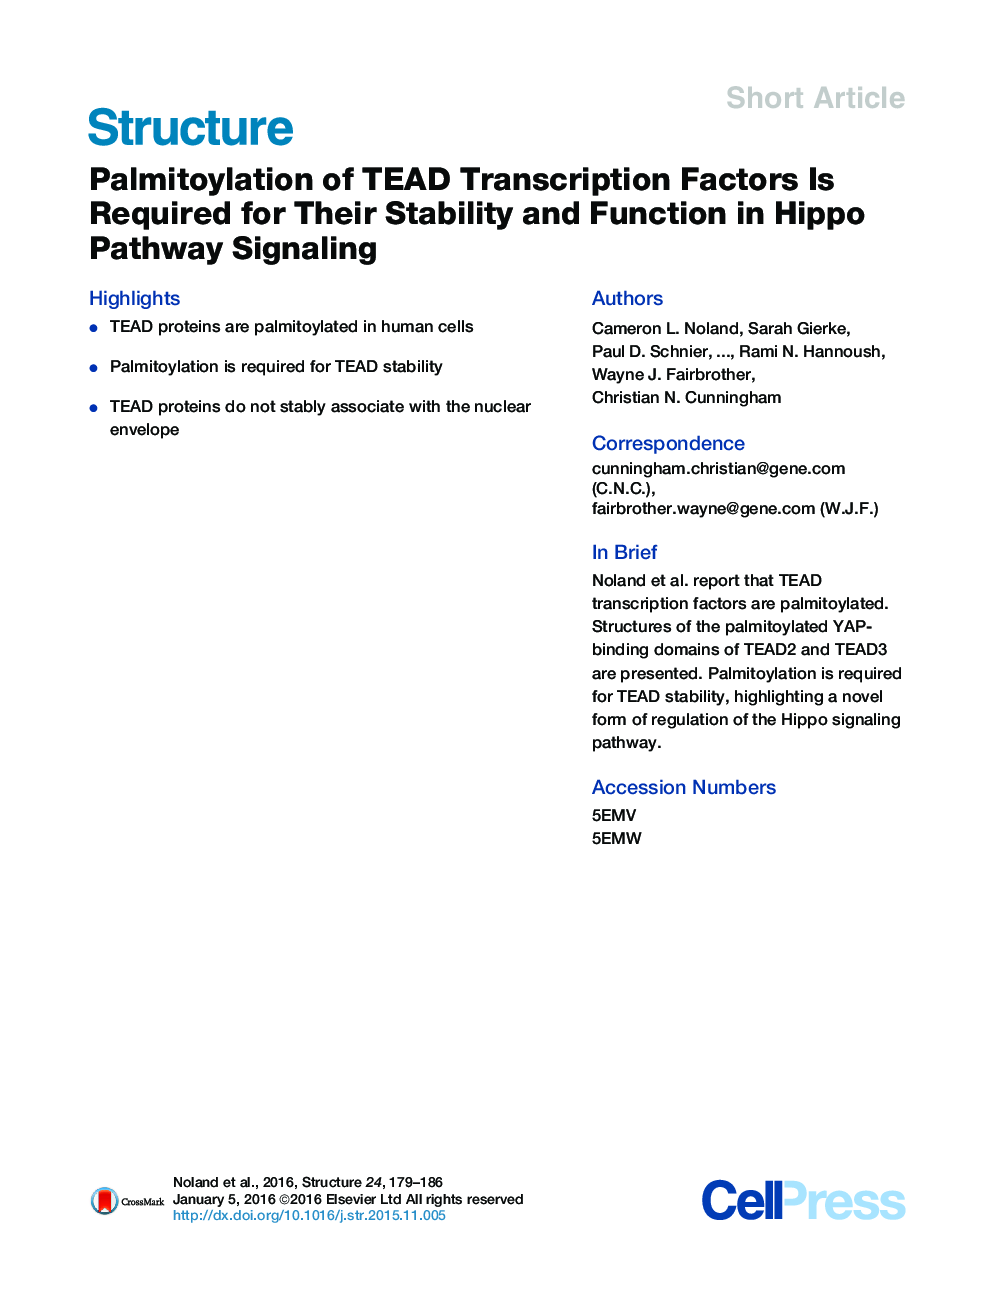 Palmitoylation of TEAD Transcription Factors Is Required for Their Stability and Function in Hippo Pathway Signaling